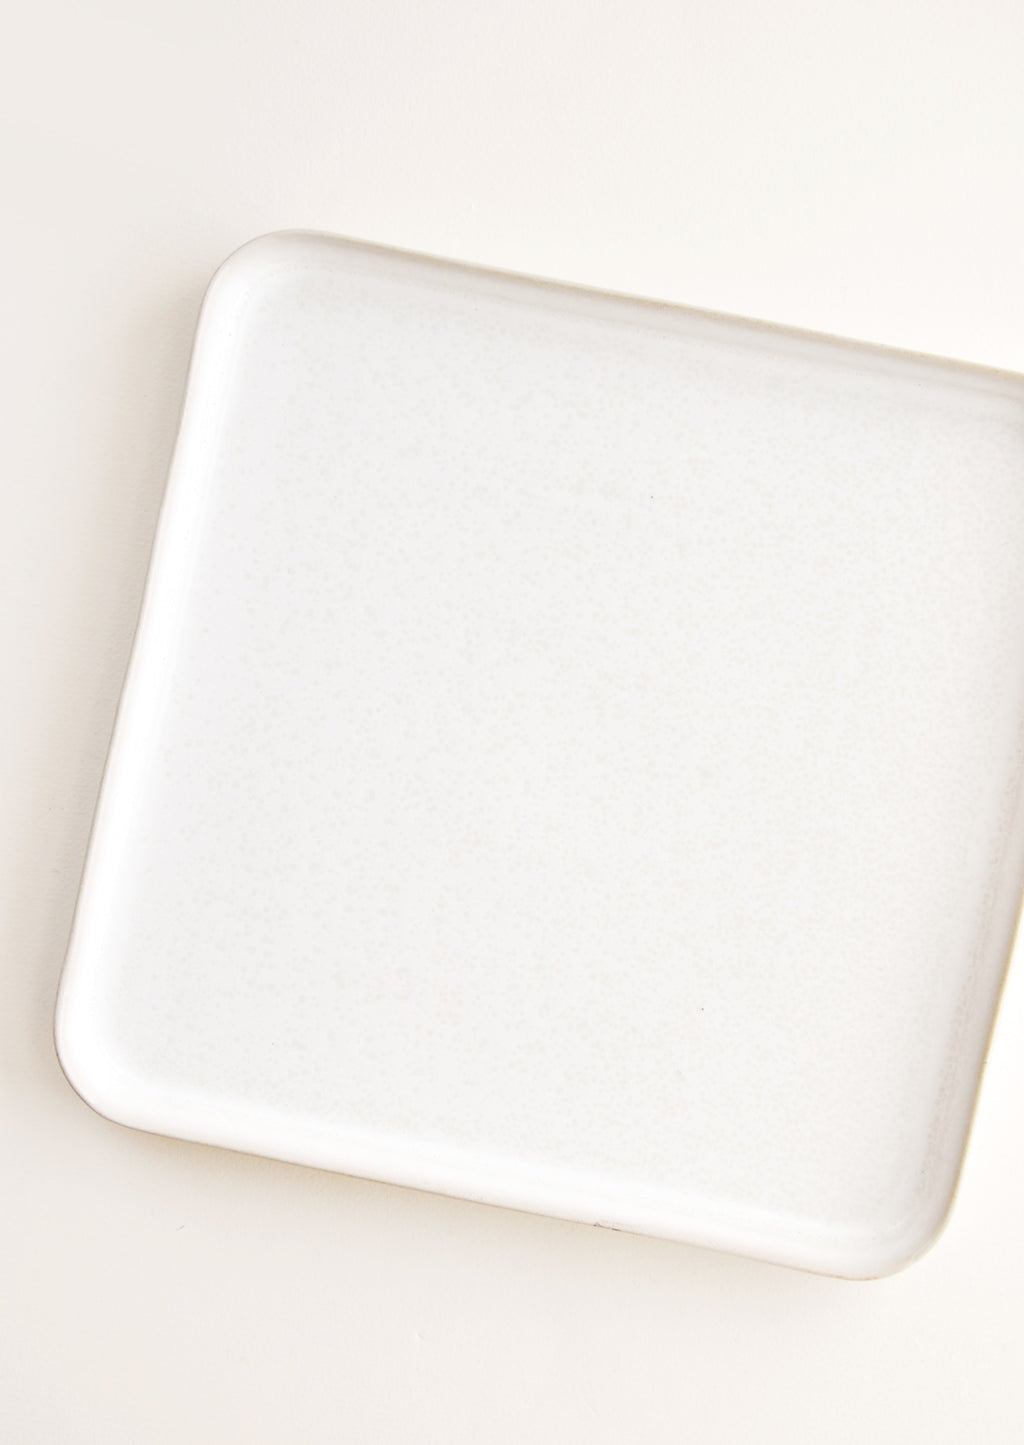 1: Square Ceramic Tray with Lipped Edge in Ivory.